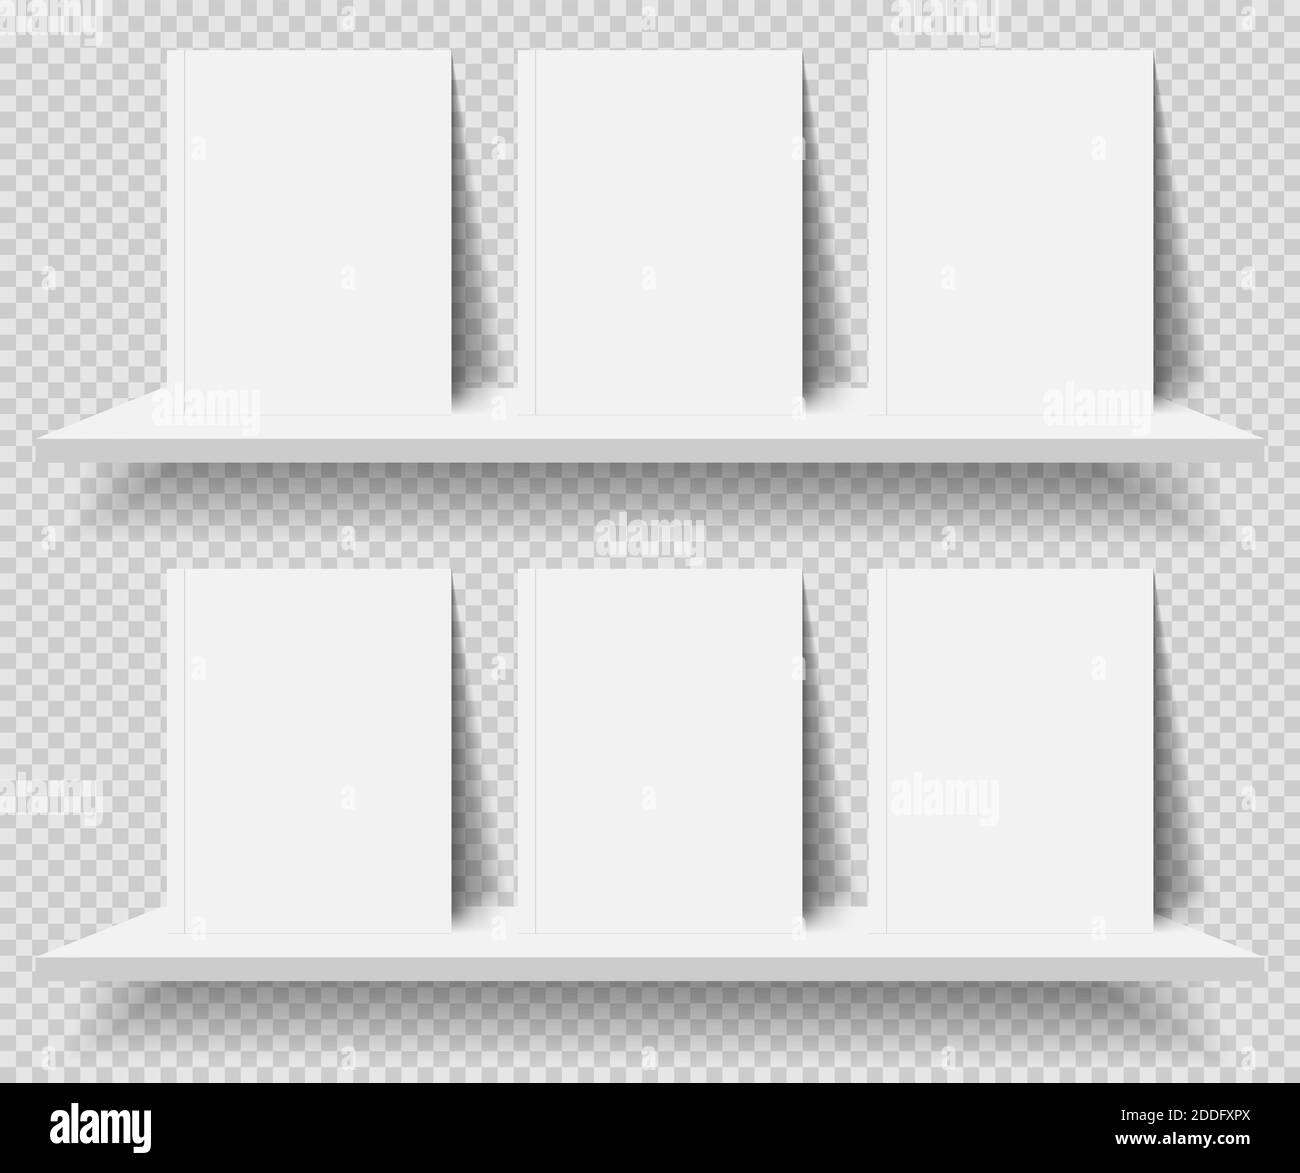 Bookshelf and books with blank covers on transparent background. Stock Vector